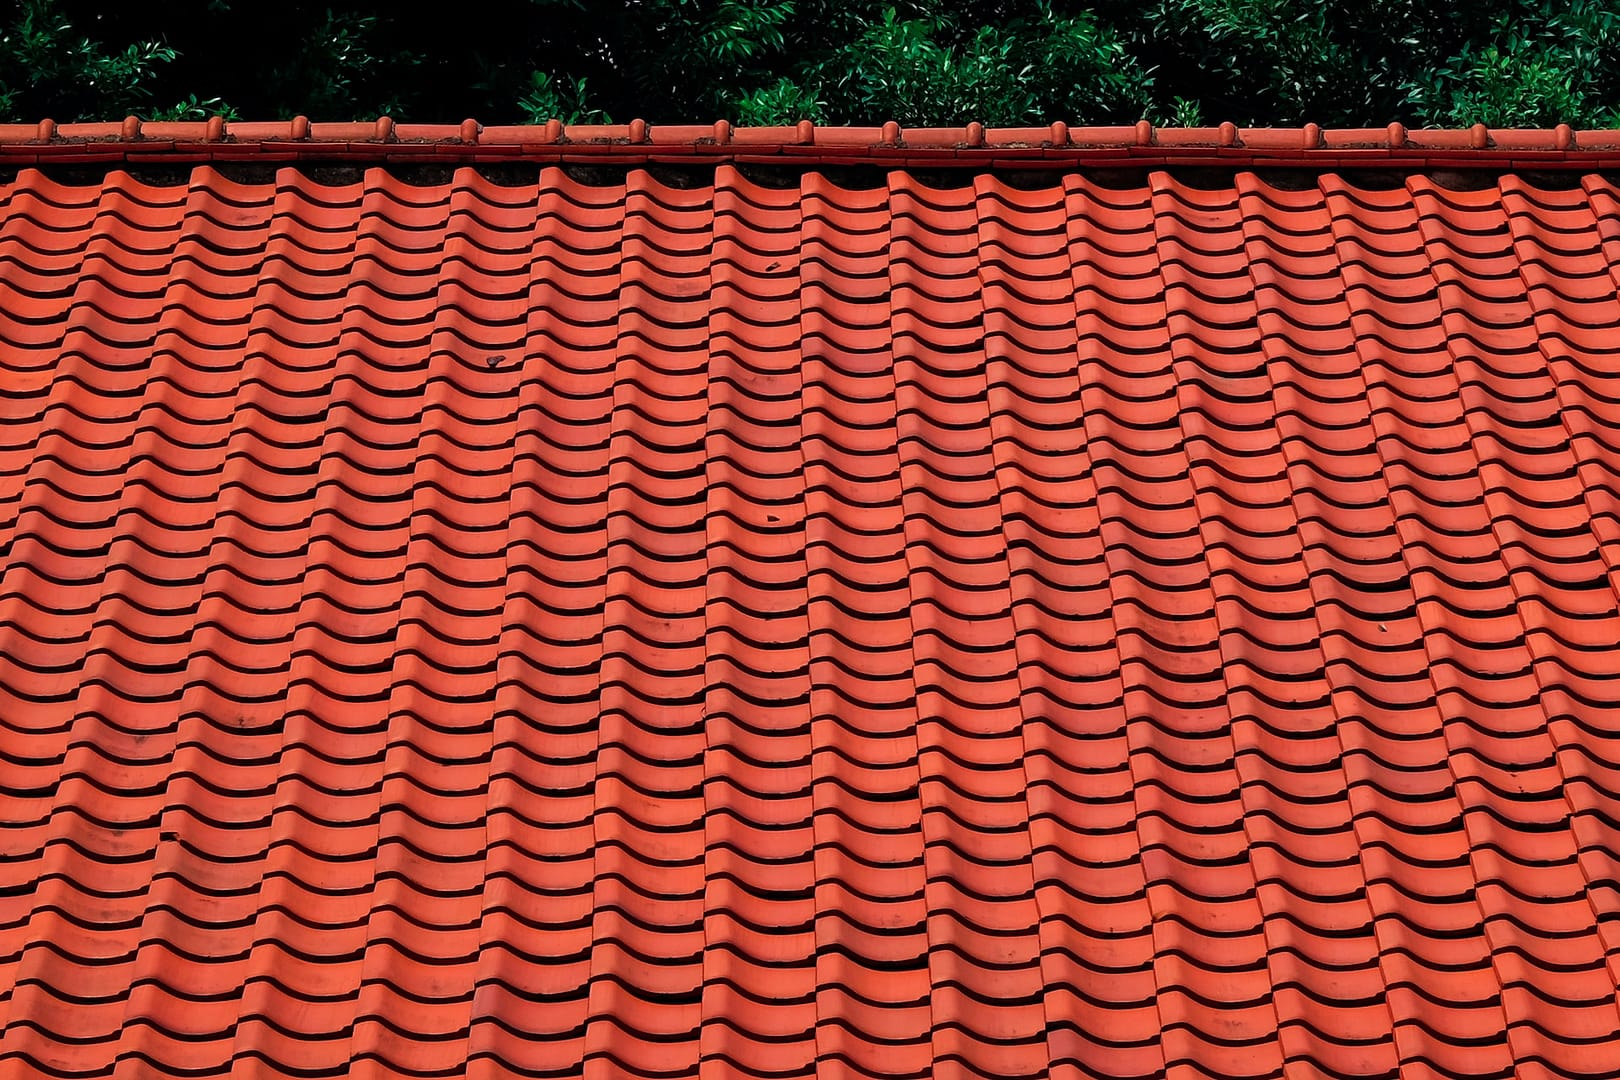 A tiled roof